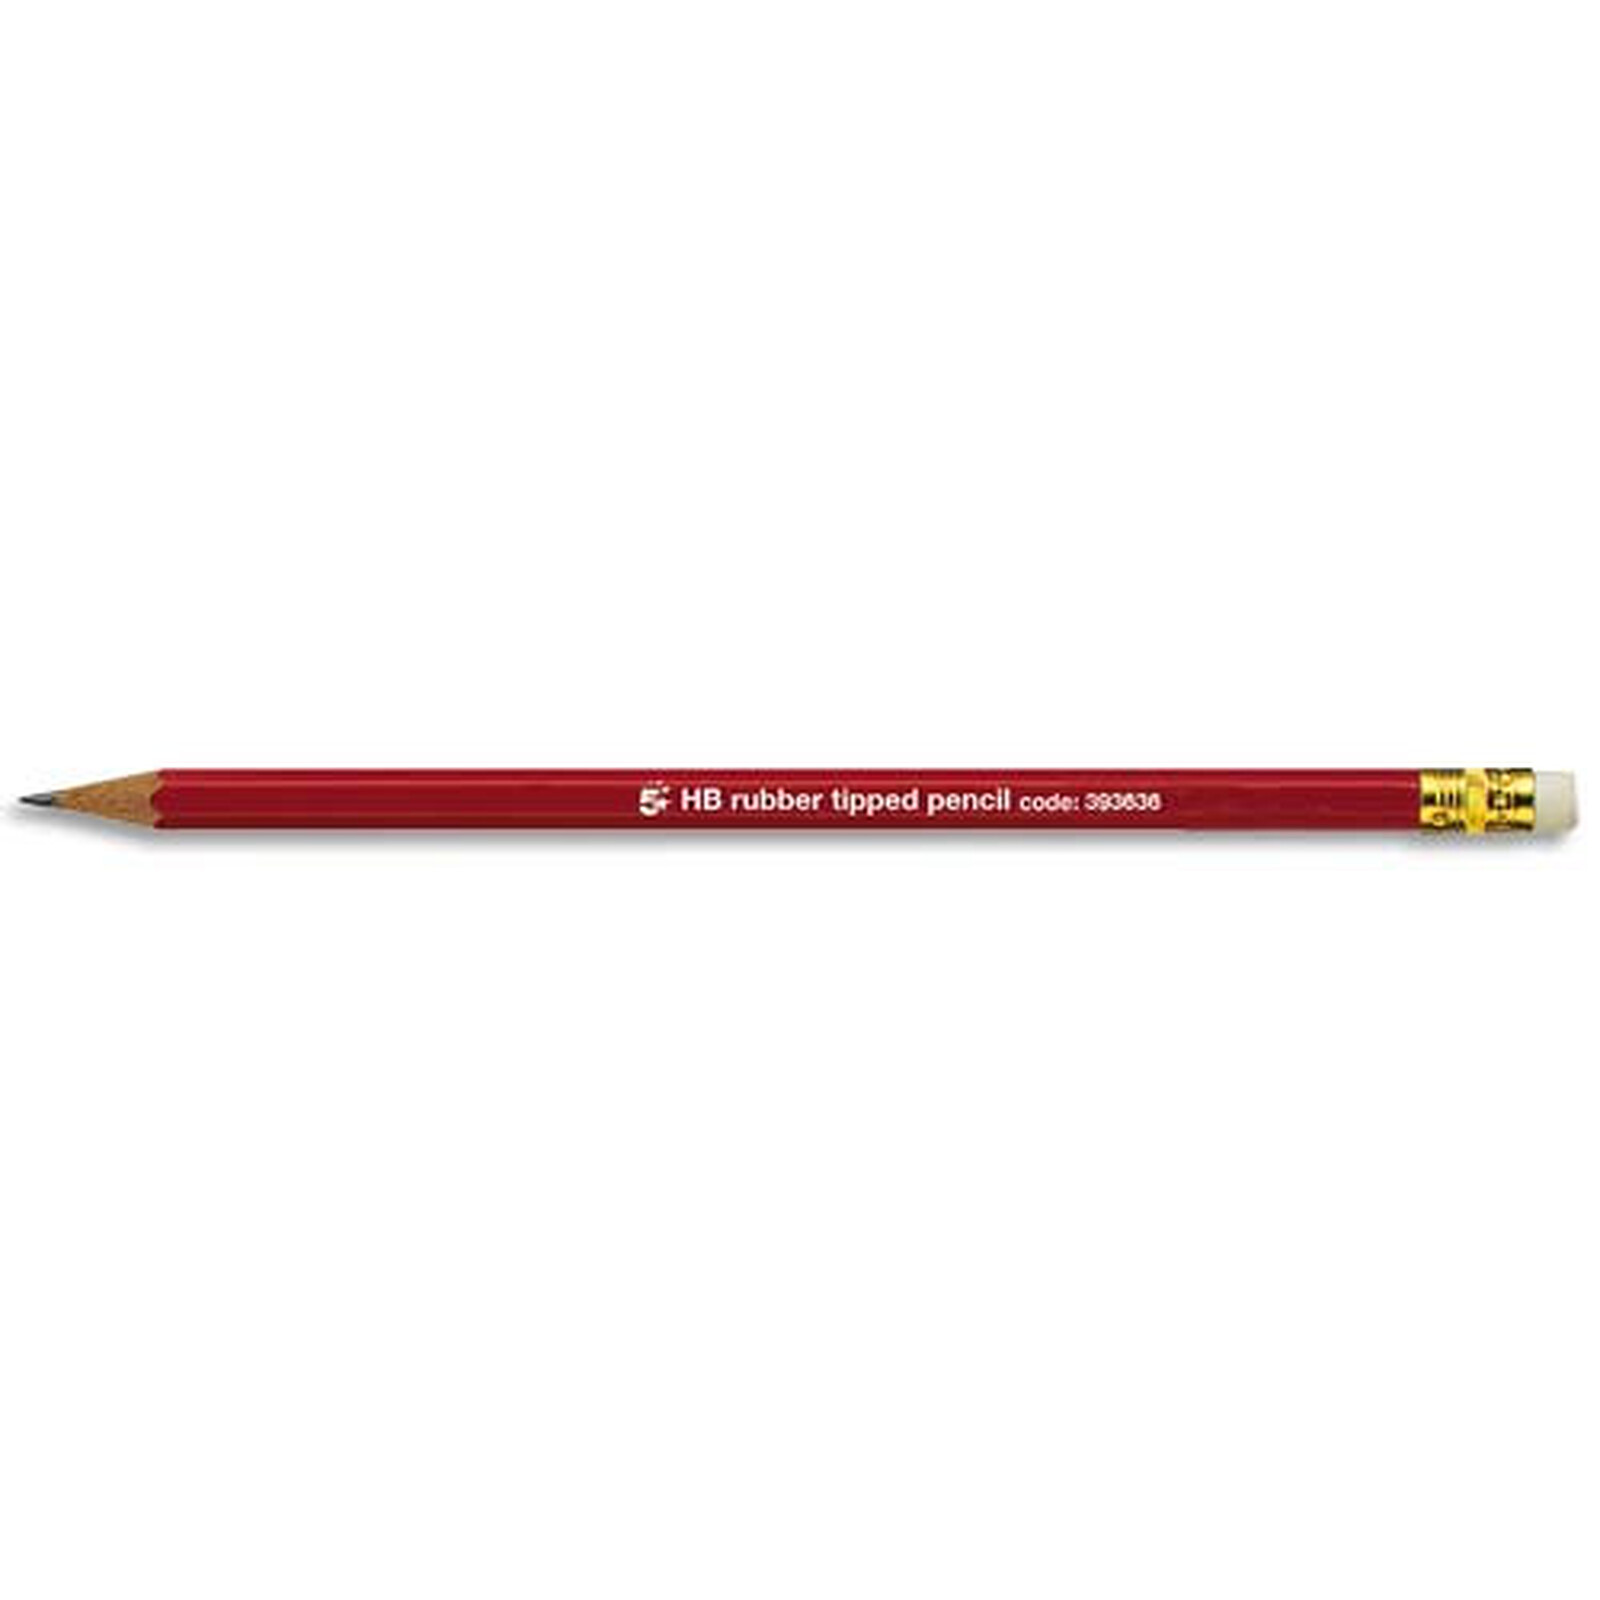 Crayon Graphite MAPED Black'Peps Pastel Embout Gomme